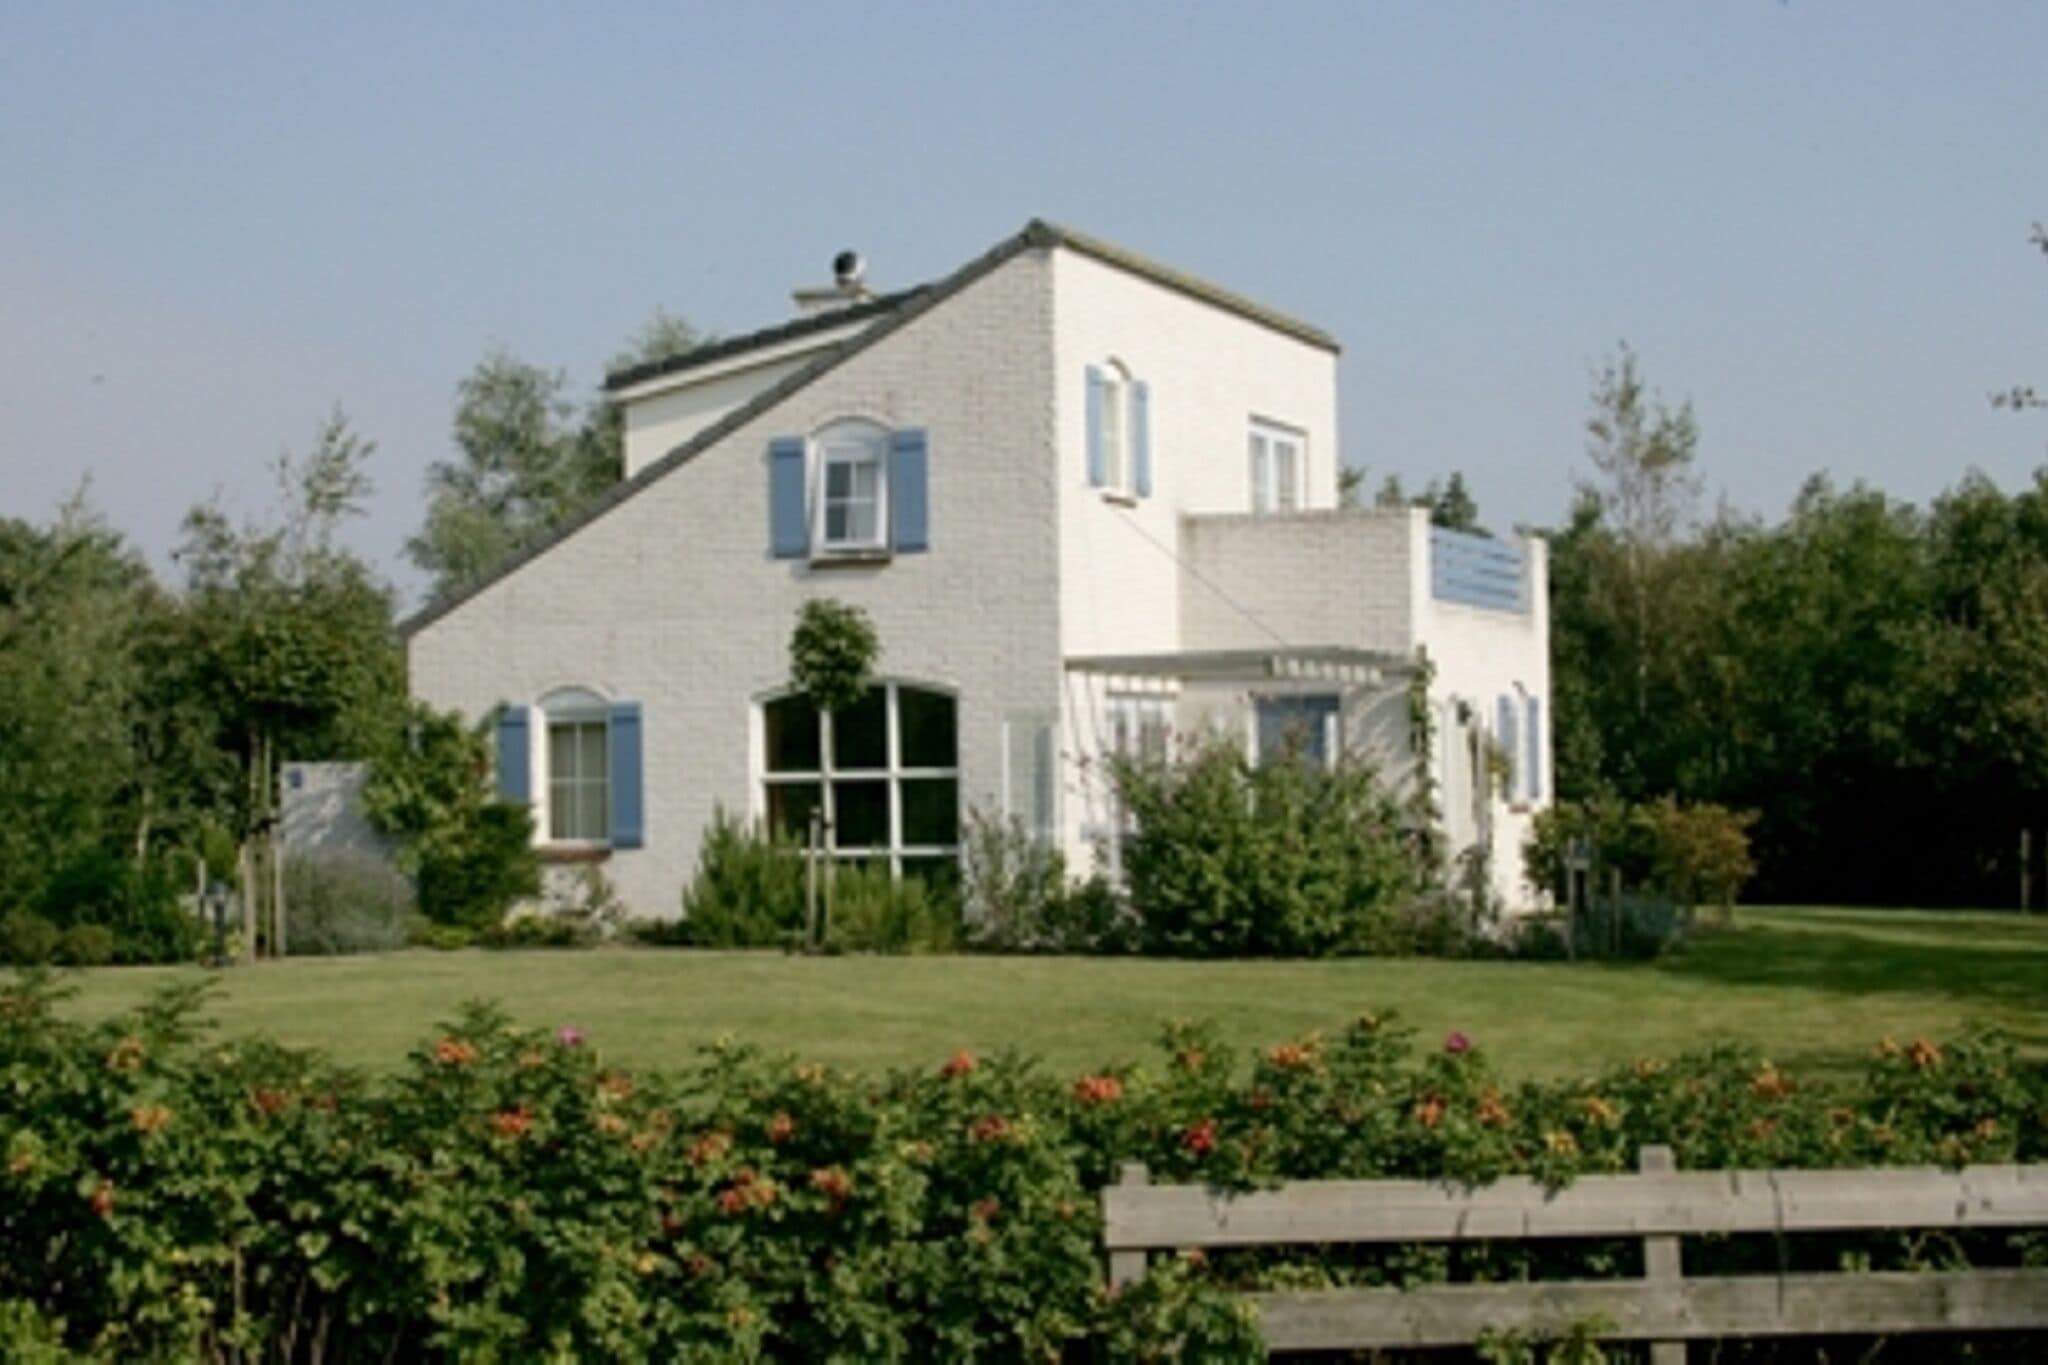 Detached villa with fireplace on Texel